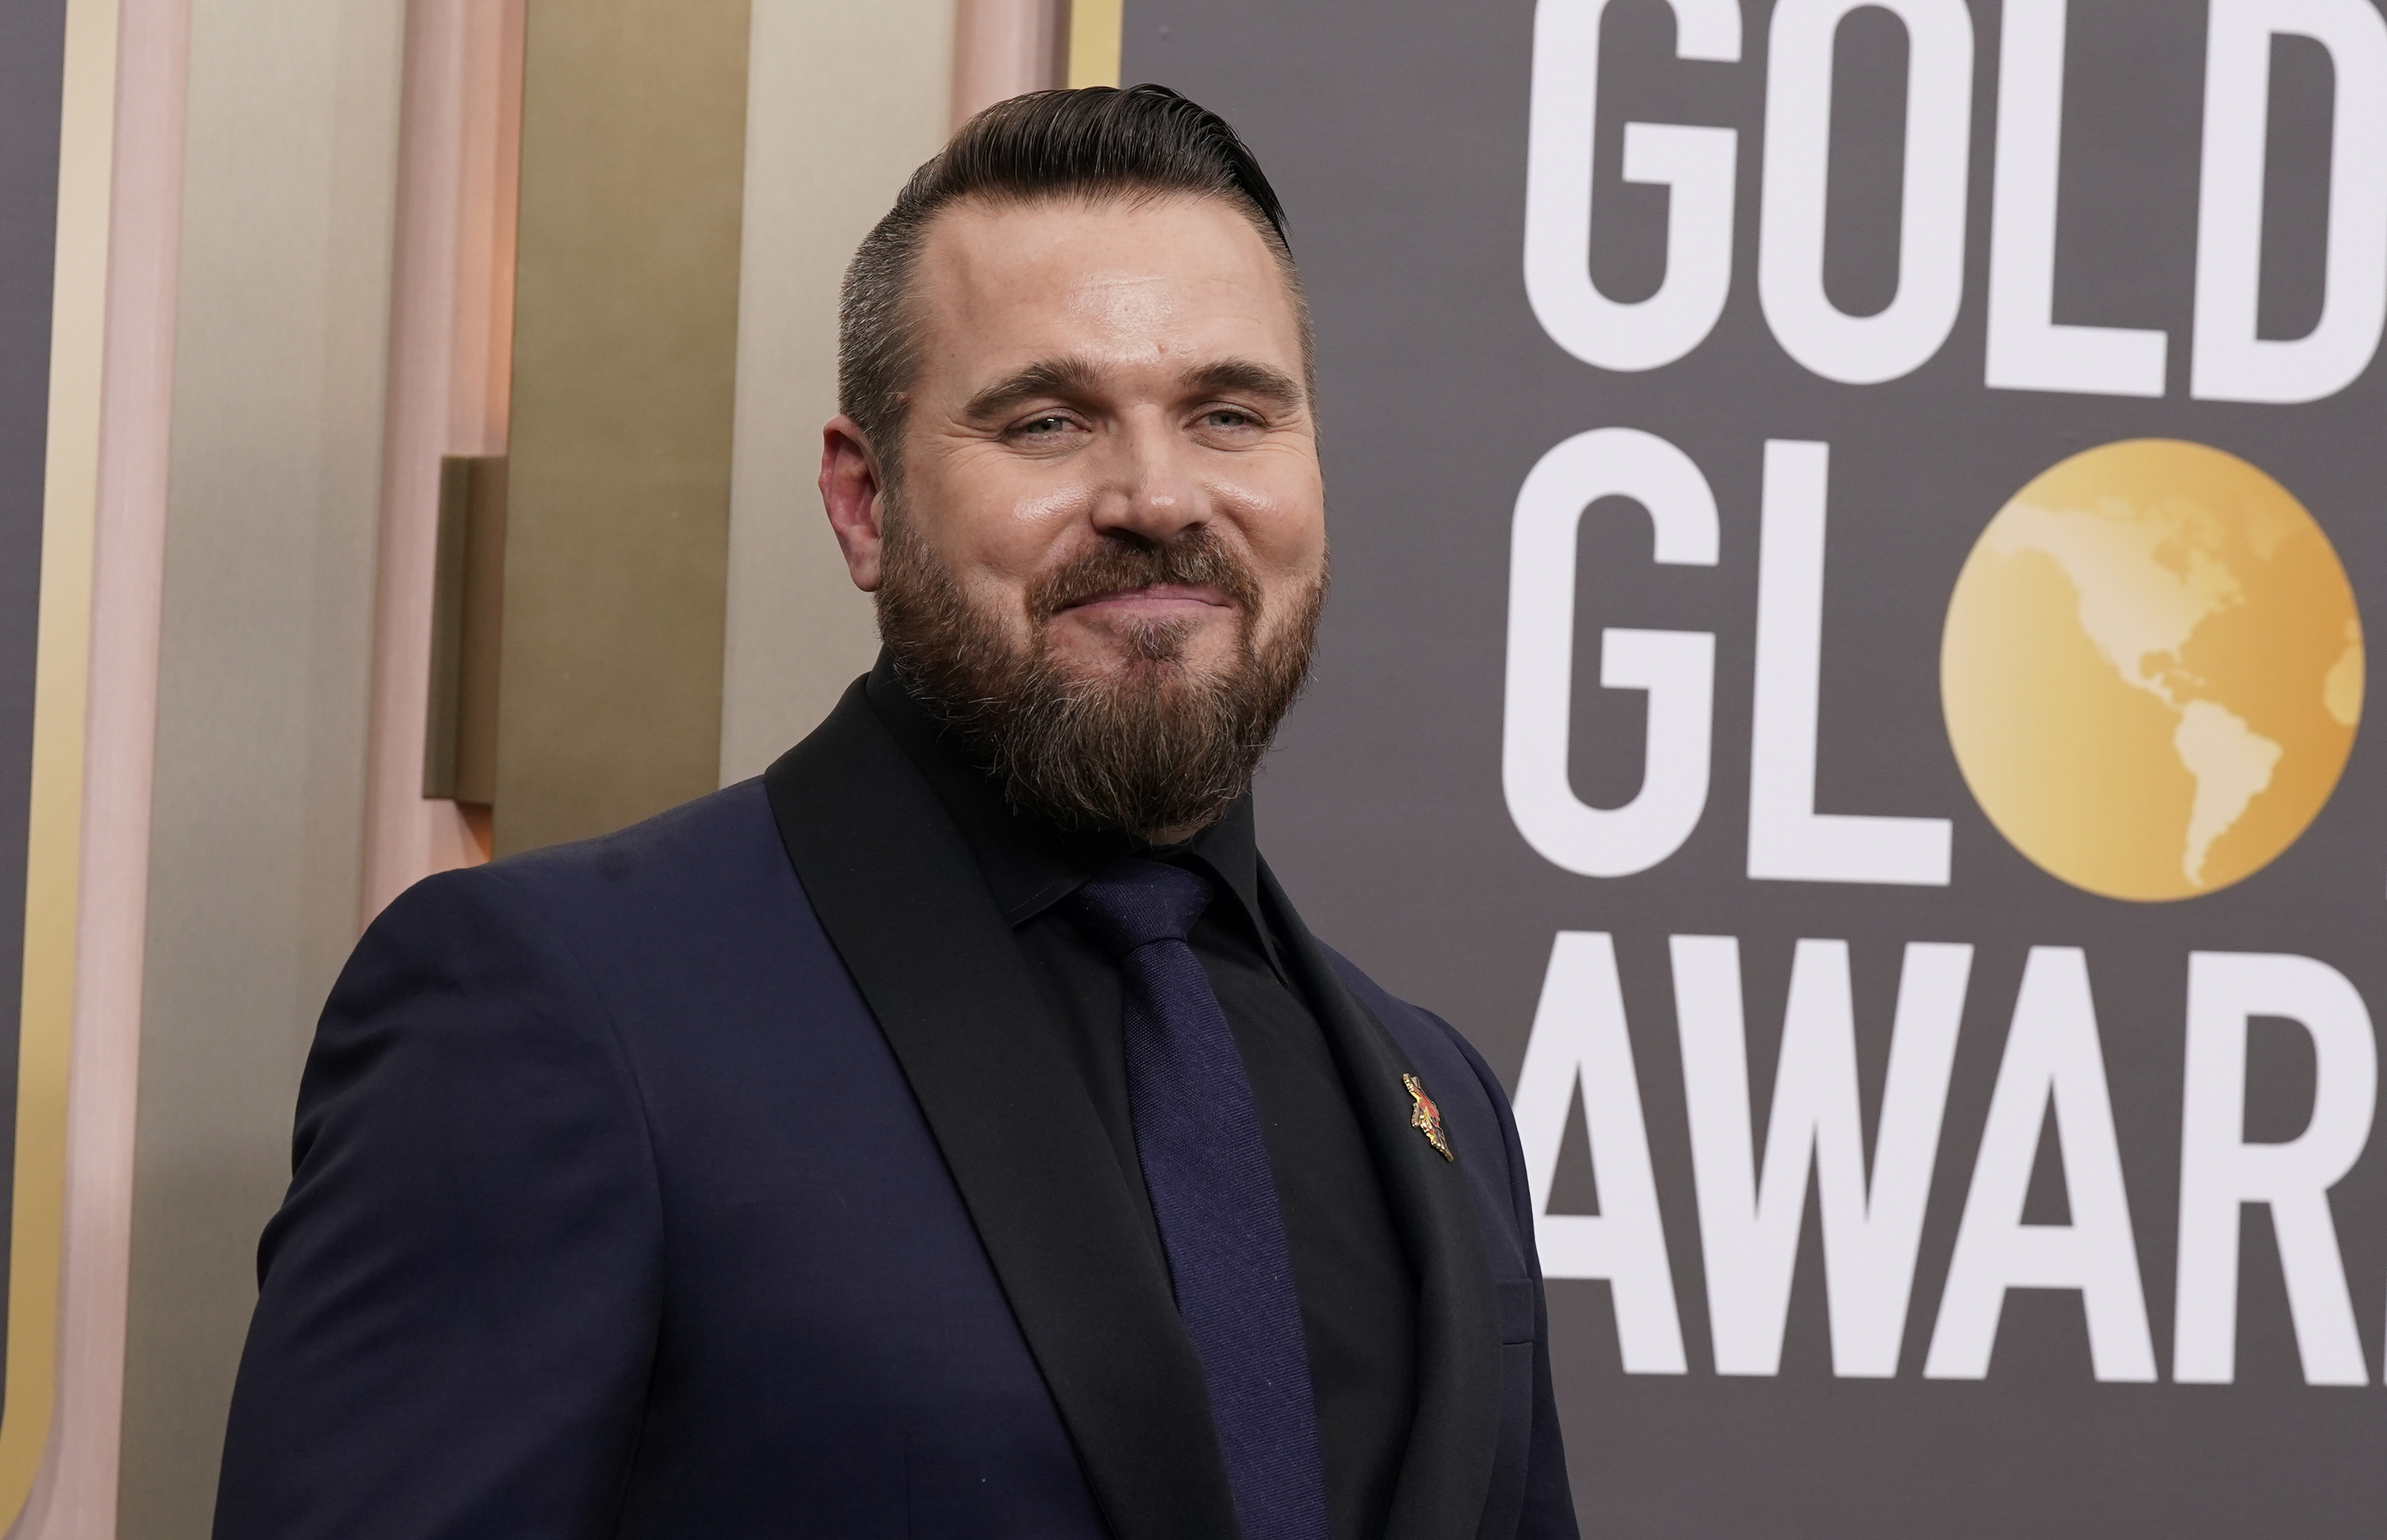 Joel Crawford arrives at the 80th annual Golden Globe Awards at the Beverly Hilton Hotel on Tuesday, Jan. 10, 2023, in Beverly Hills, Calif. (Photo by Jordan Strauss/Invision/AP)